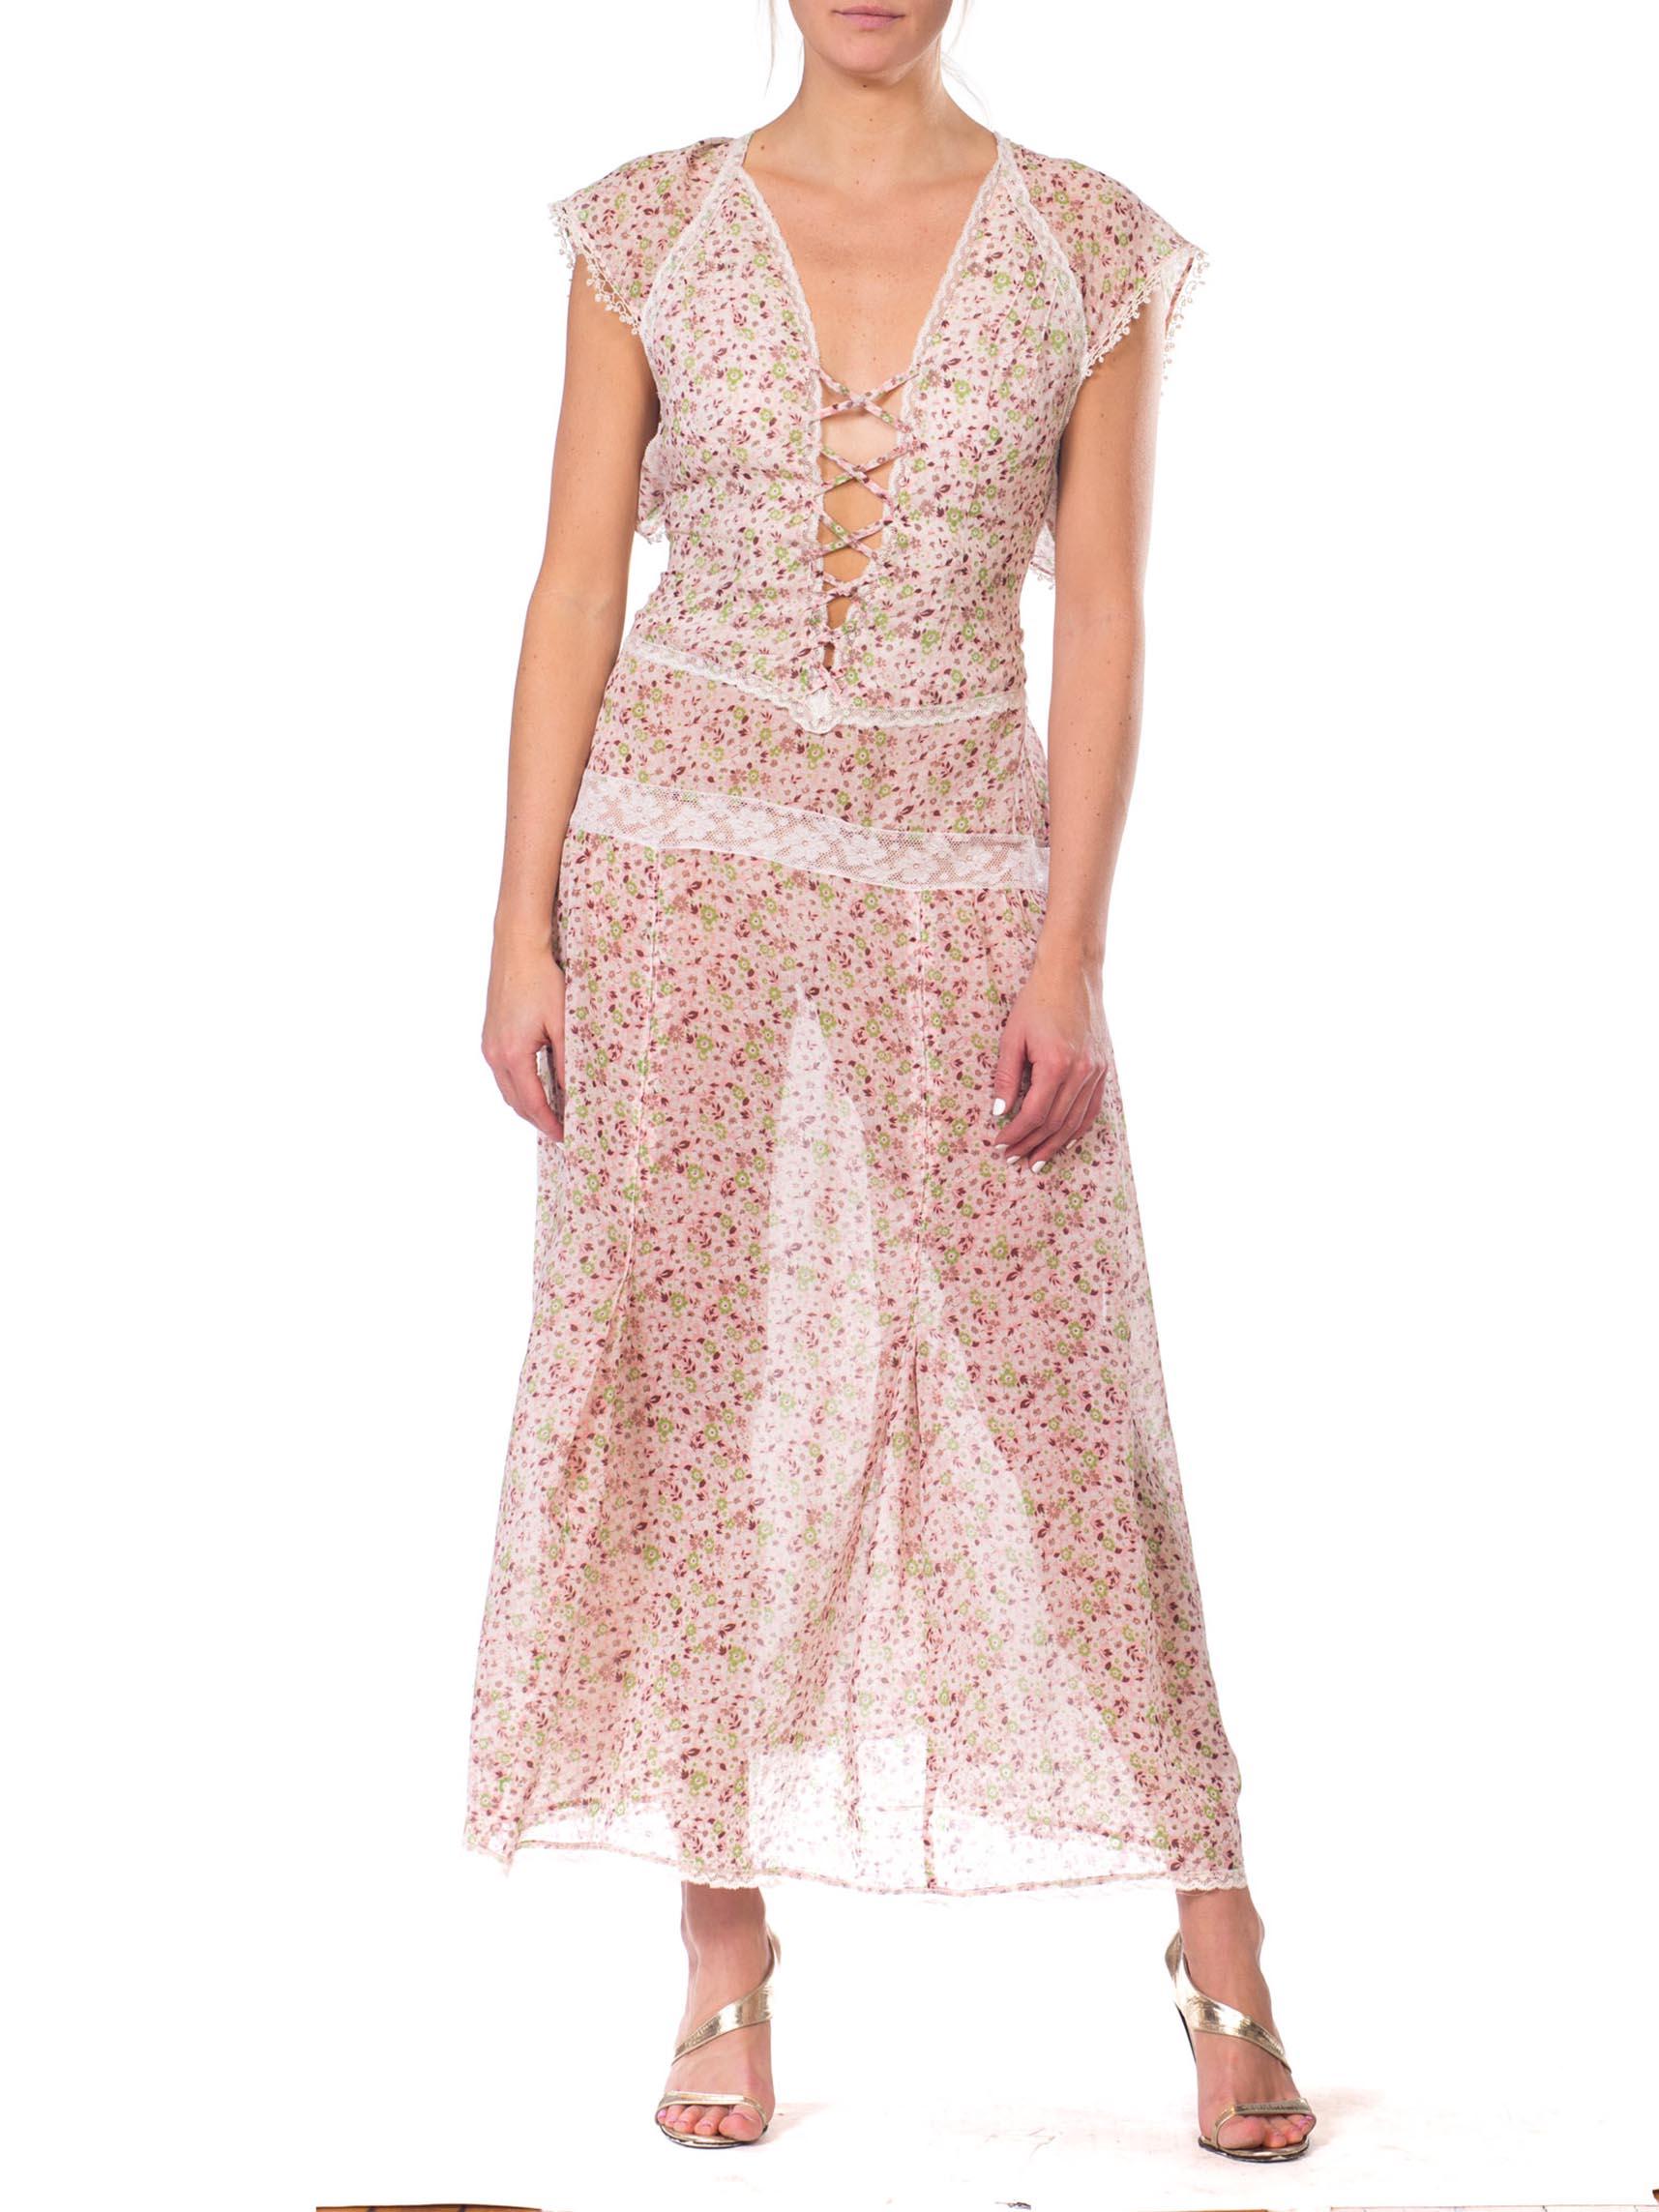 MORPHEW COLLECTION Backless Maxi Dress Made From 1930S Floral Cotton With Victorian Lace